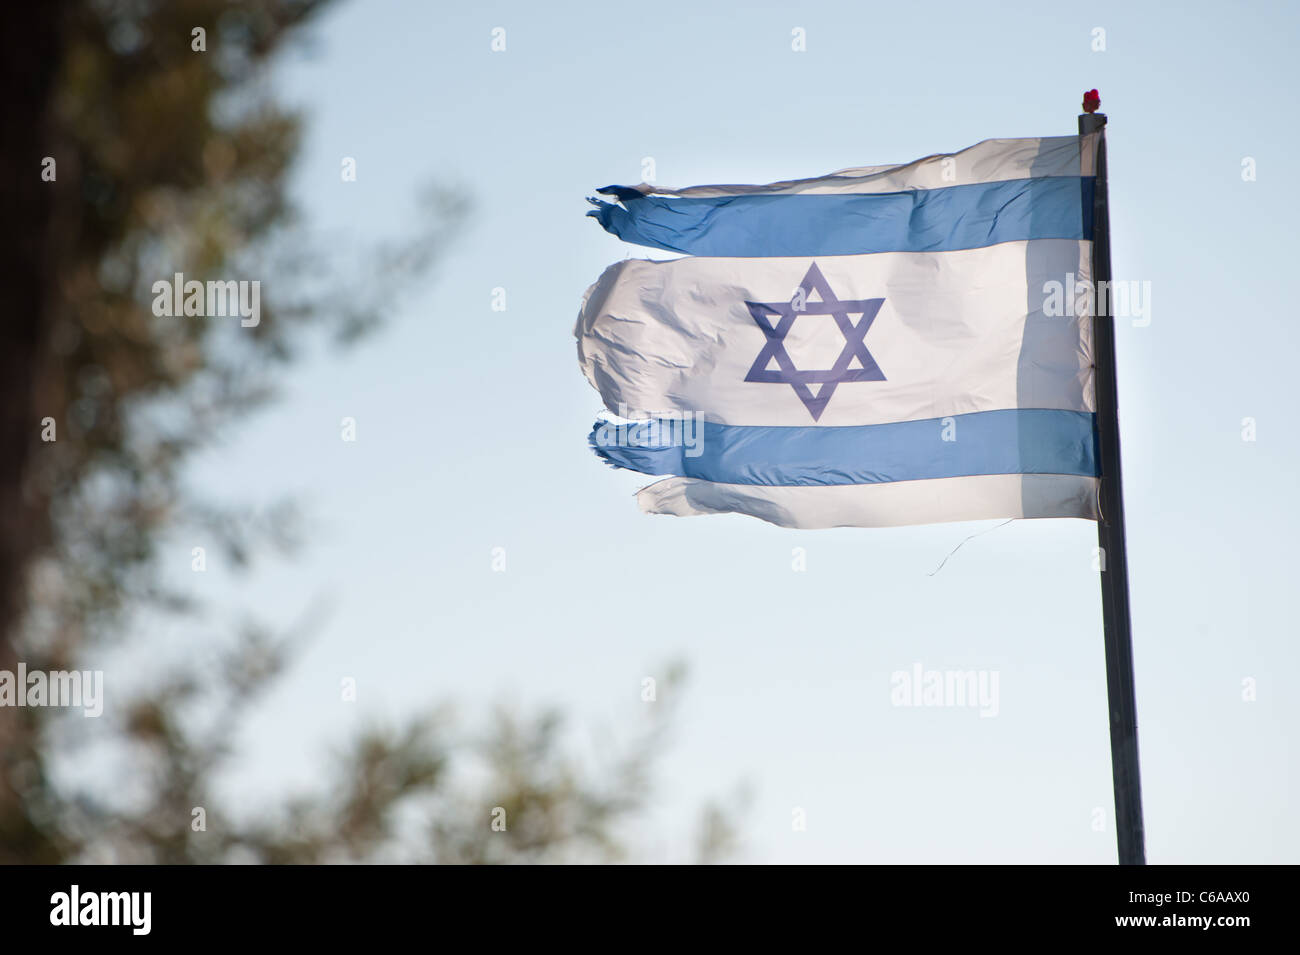 A ragged Israeli flag flies over the Jewish settlement of Beit Hoshen on the Mount of Olives in East Jerusalem. Stock Photo